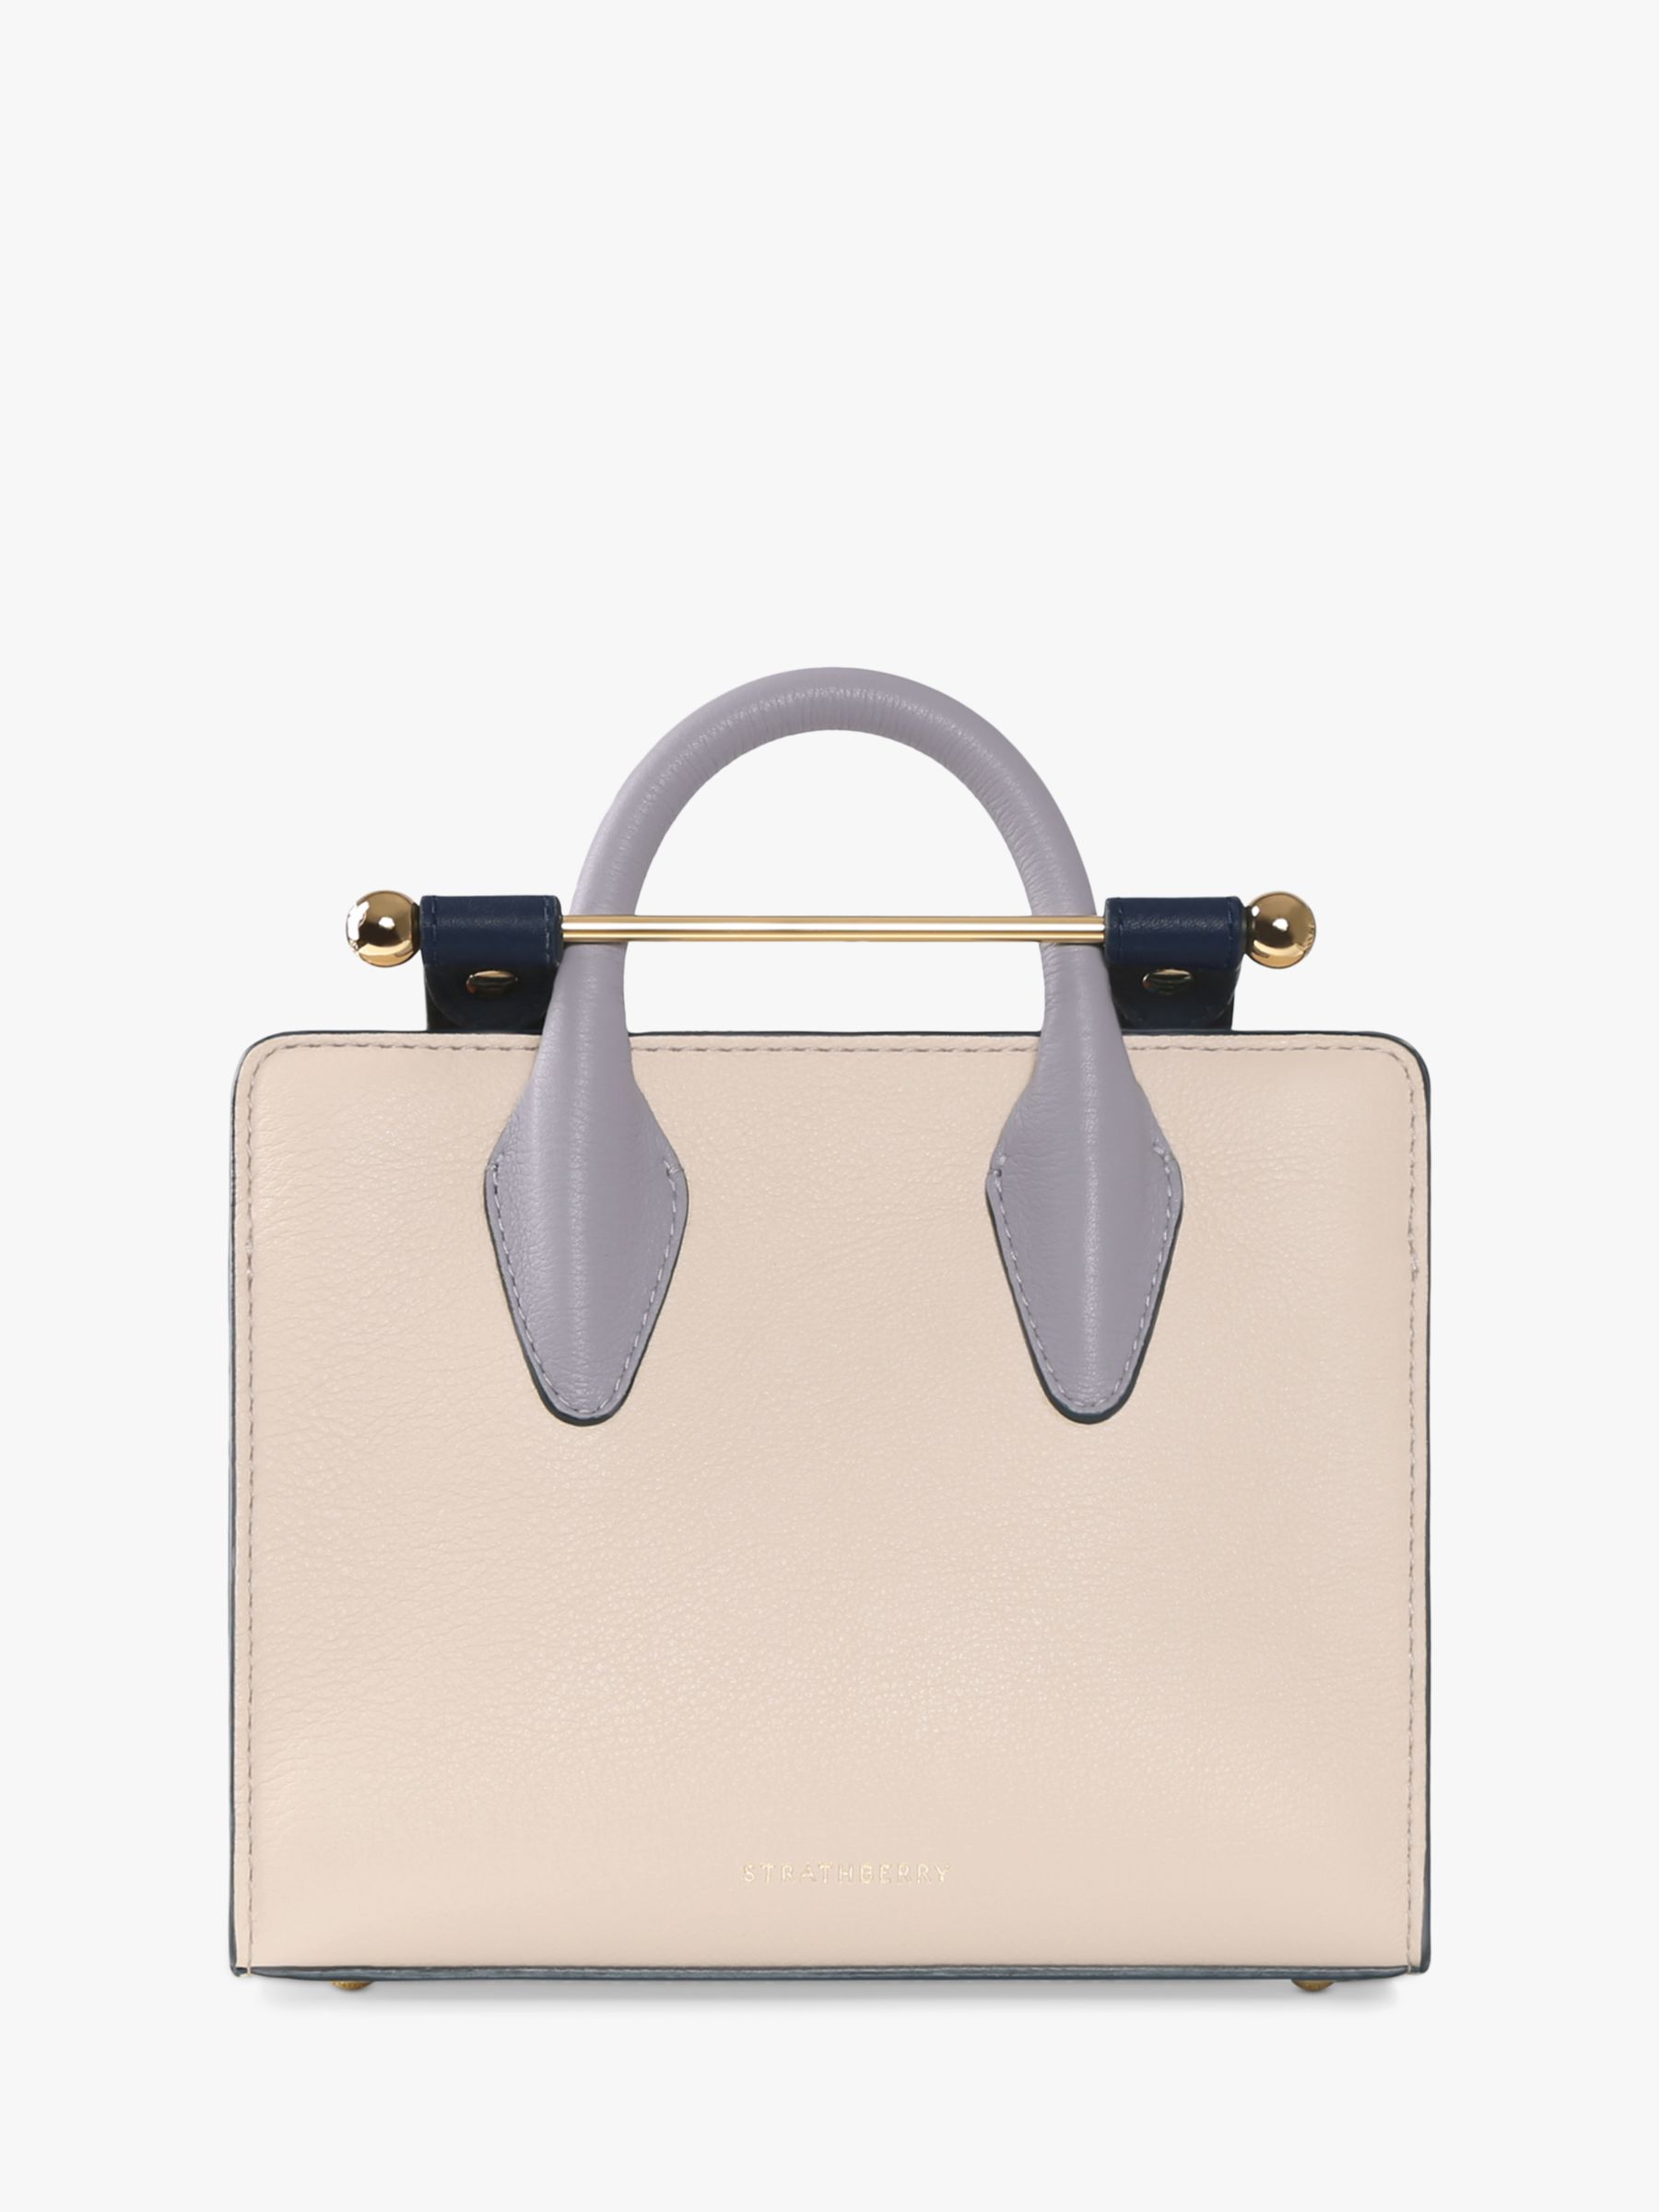 Buy Blue and Beige Nano Leather Tote, Strathberry